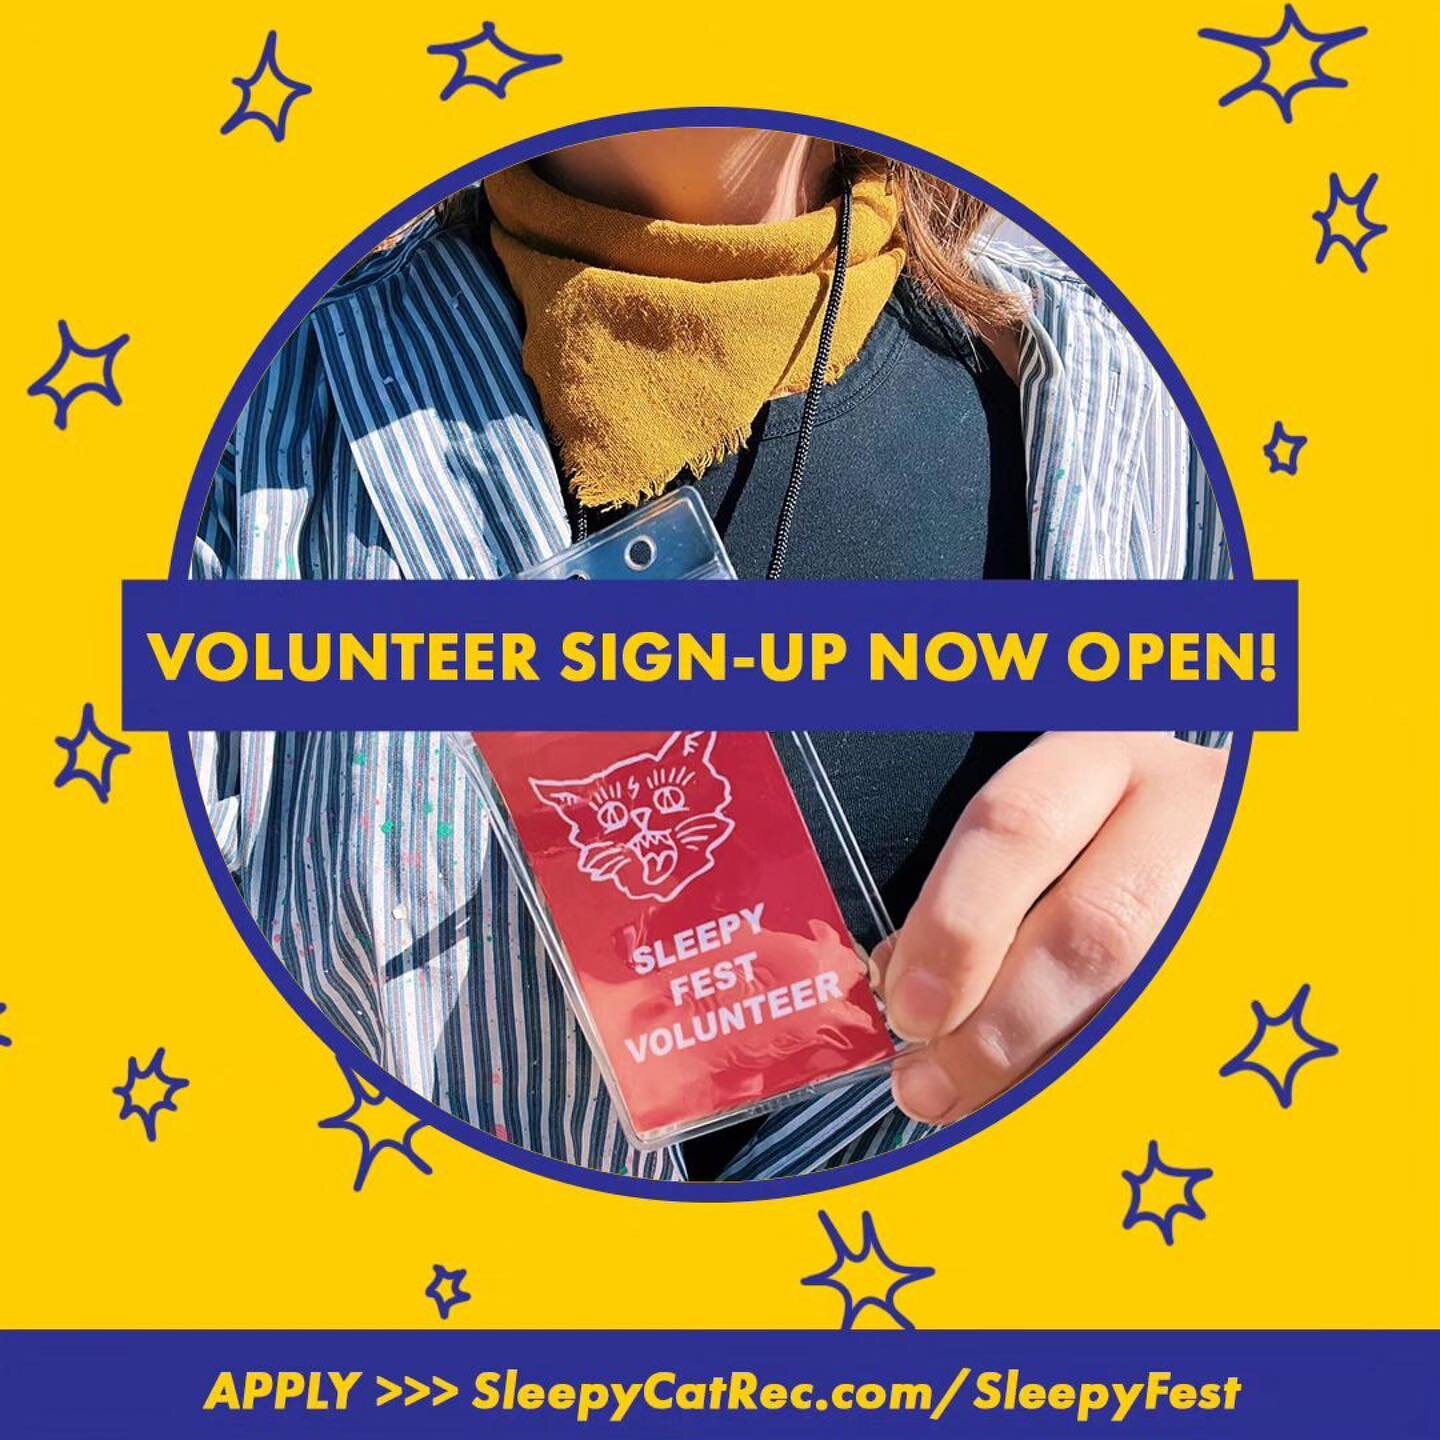 Our volunteers play a big role in making Sleepy Fest what it is. We&rsquo;re so grateful to everyone who puts their time and energy into creating such a special event! Volunteer for one shift (~3 hours) in exchange for free entry to Sleepy Fest. Volu